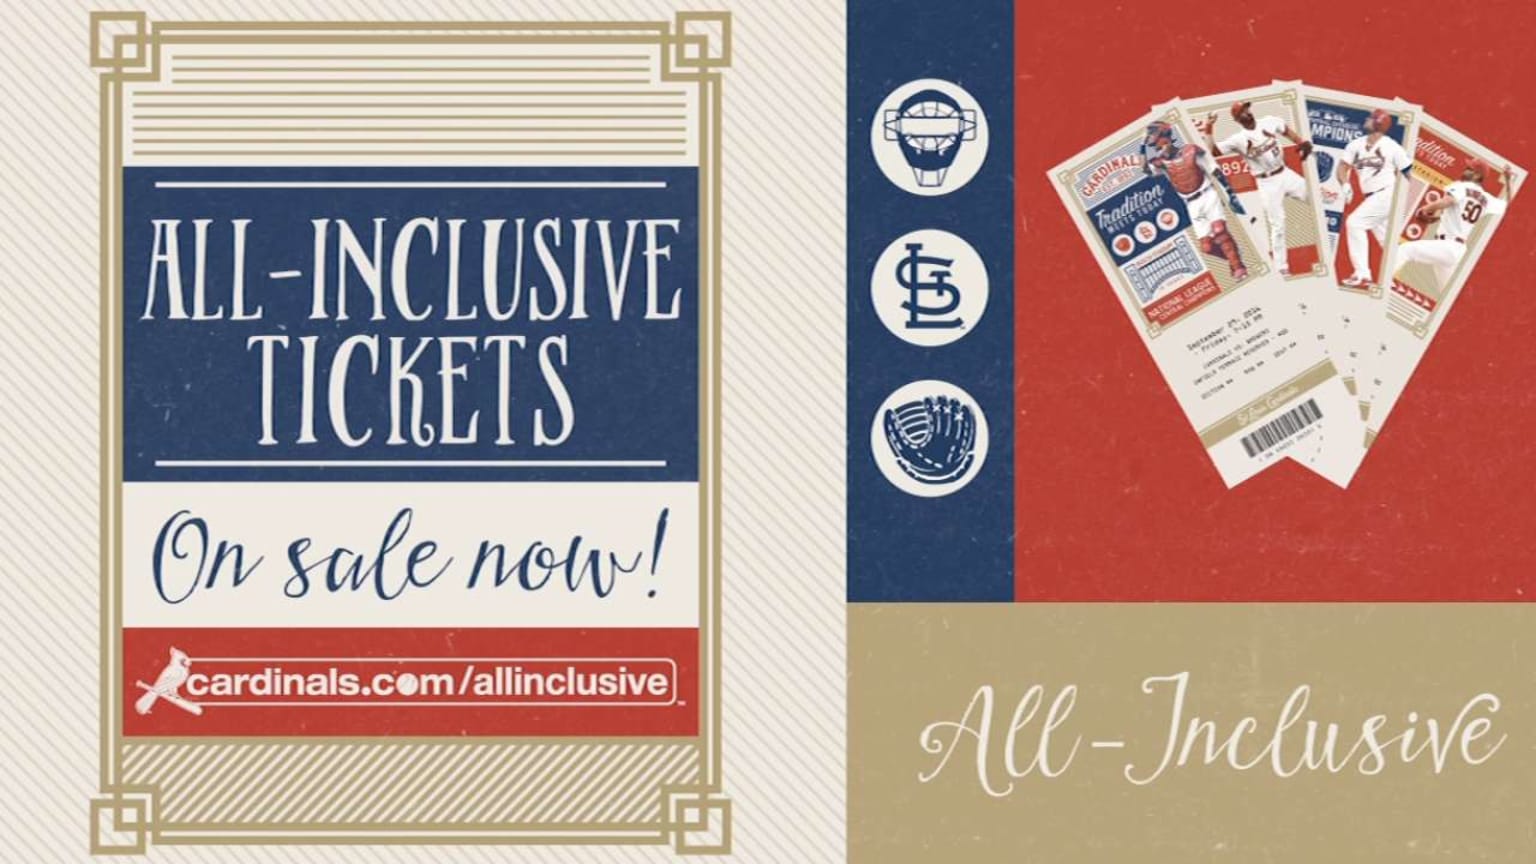 2016 Cards All-Inclusive tickets | 02/08/2016 | St. Louis Cardinals